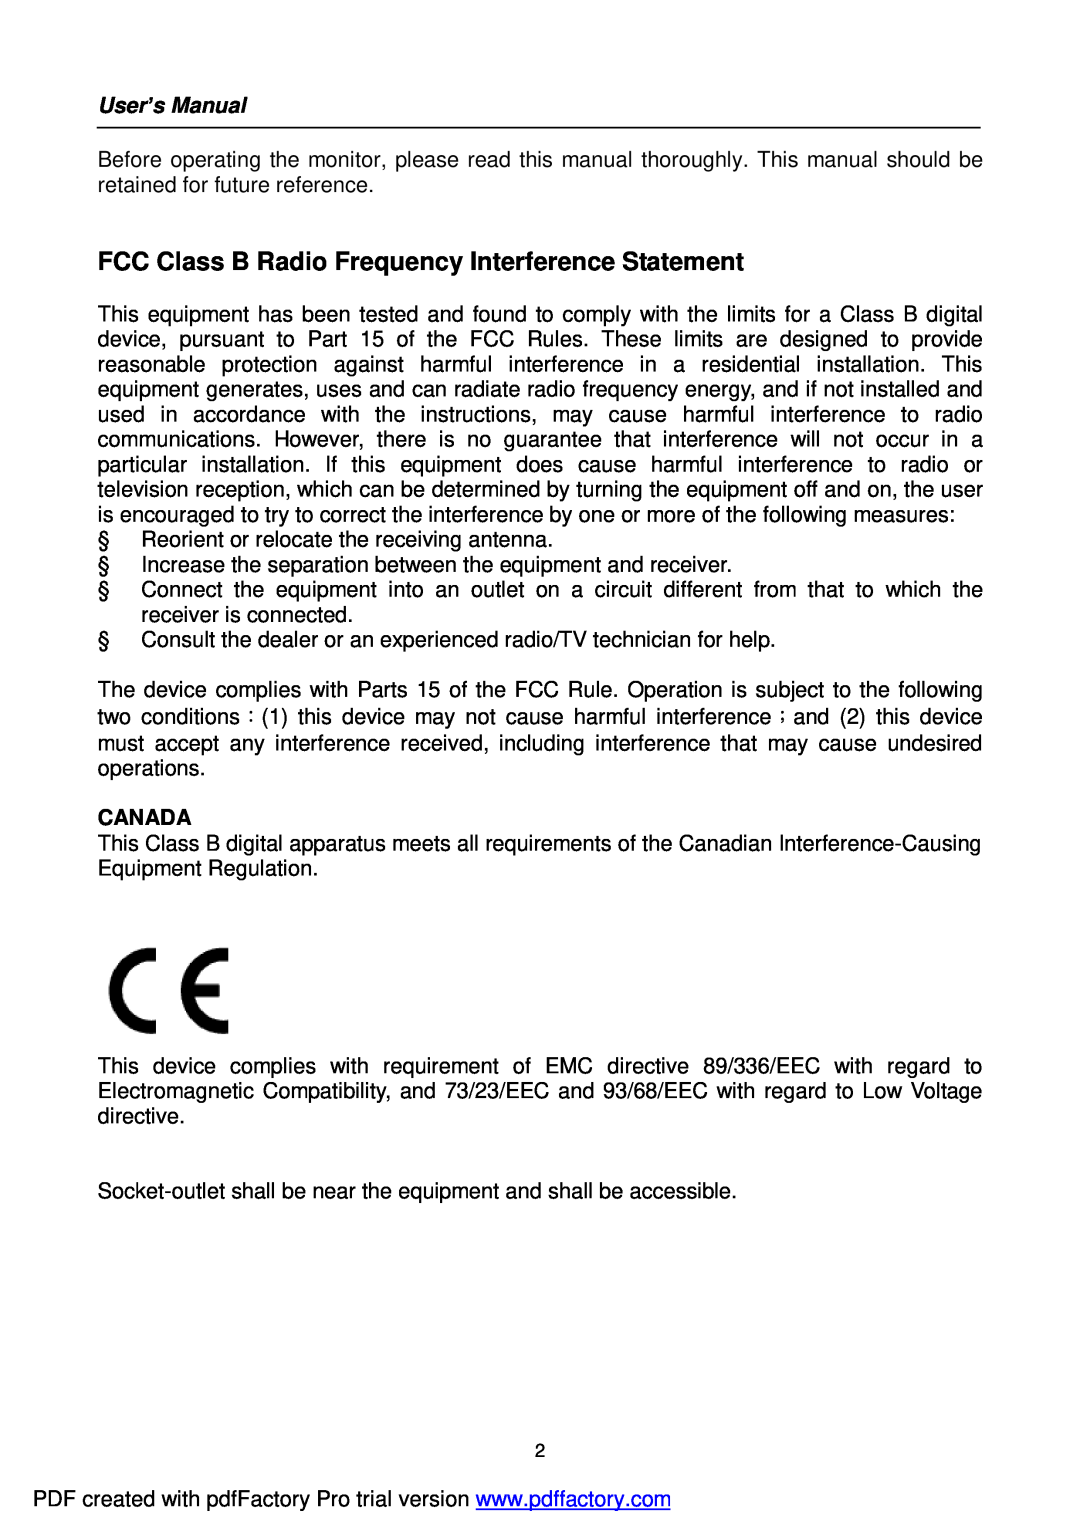 Hanns.G HI221 user manual FCC Class B Radio Frequency Interference Statement, Canada, User’s Manual 